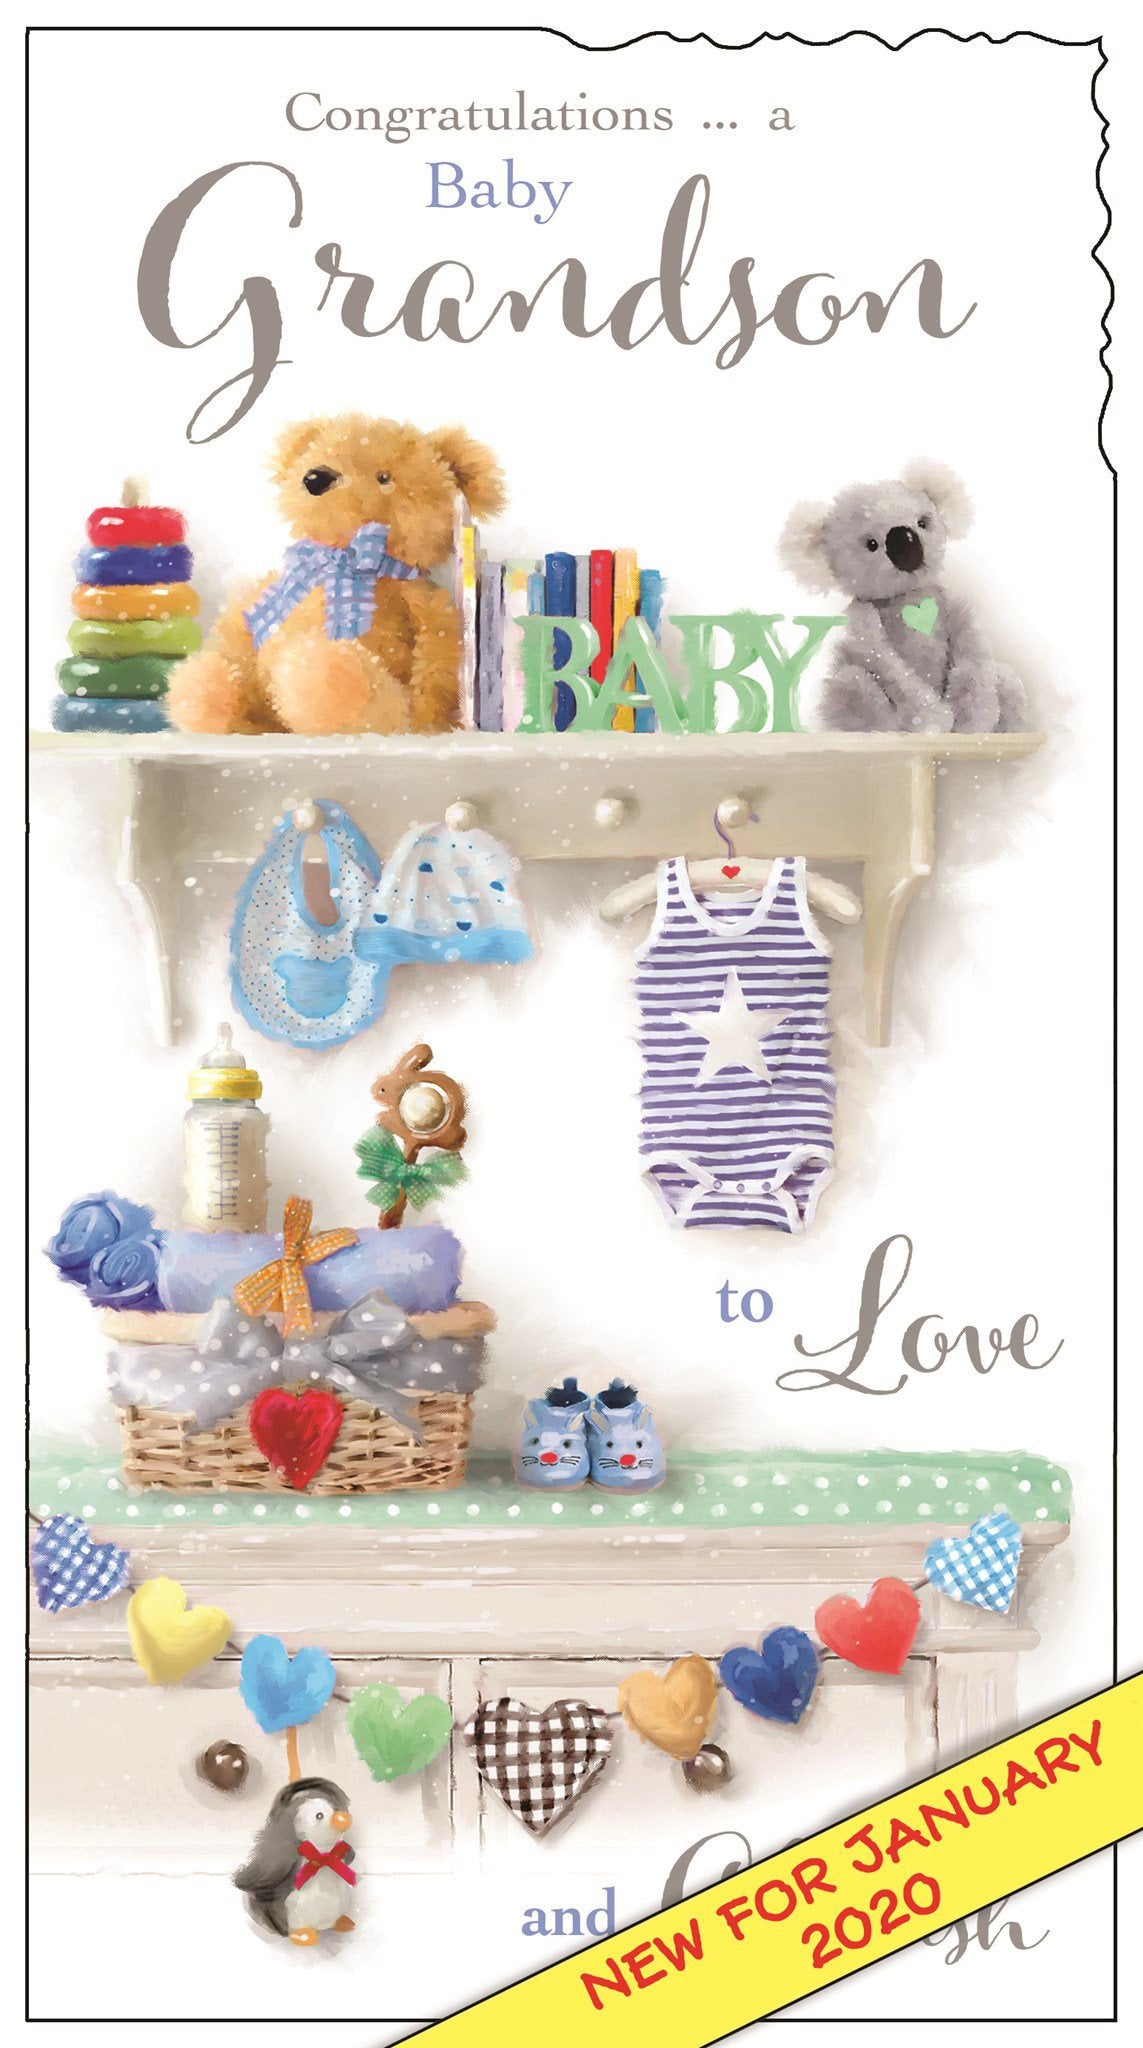 Front of Congrats New Grandson Shelf Greetings Card